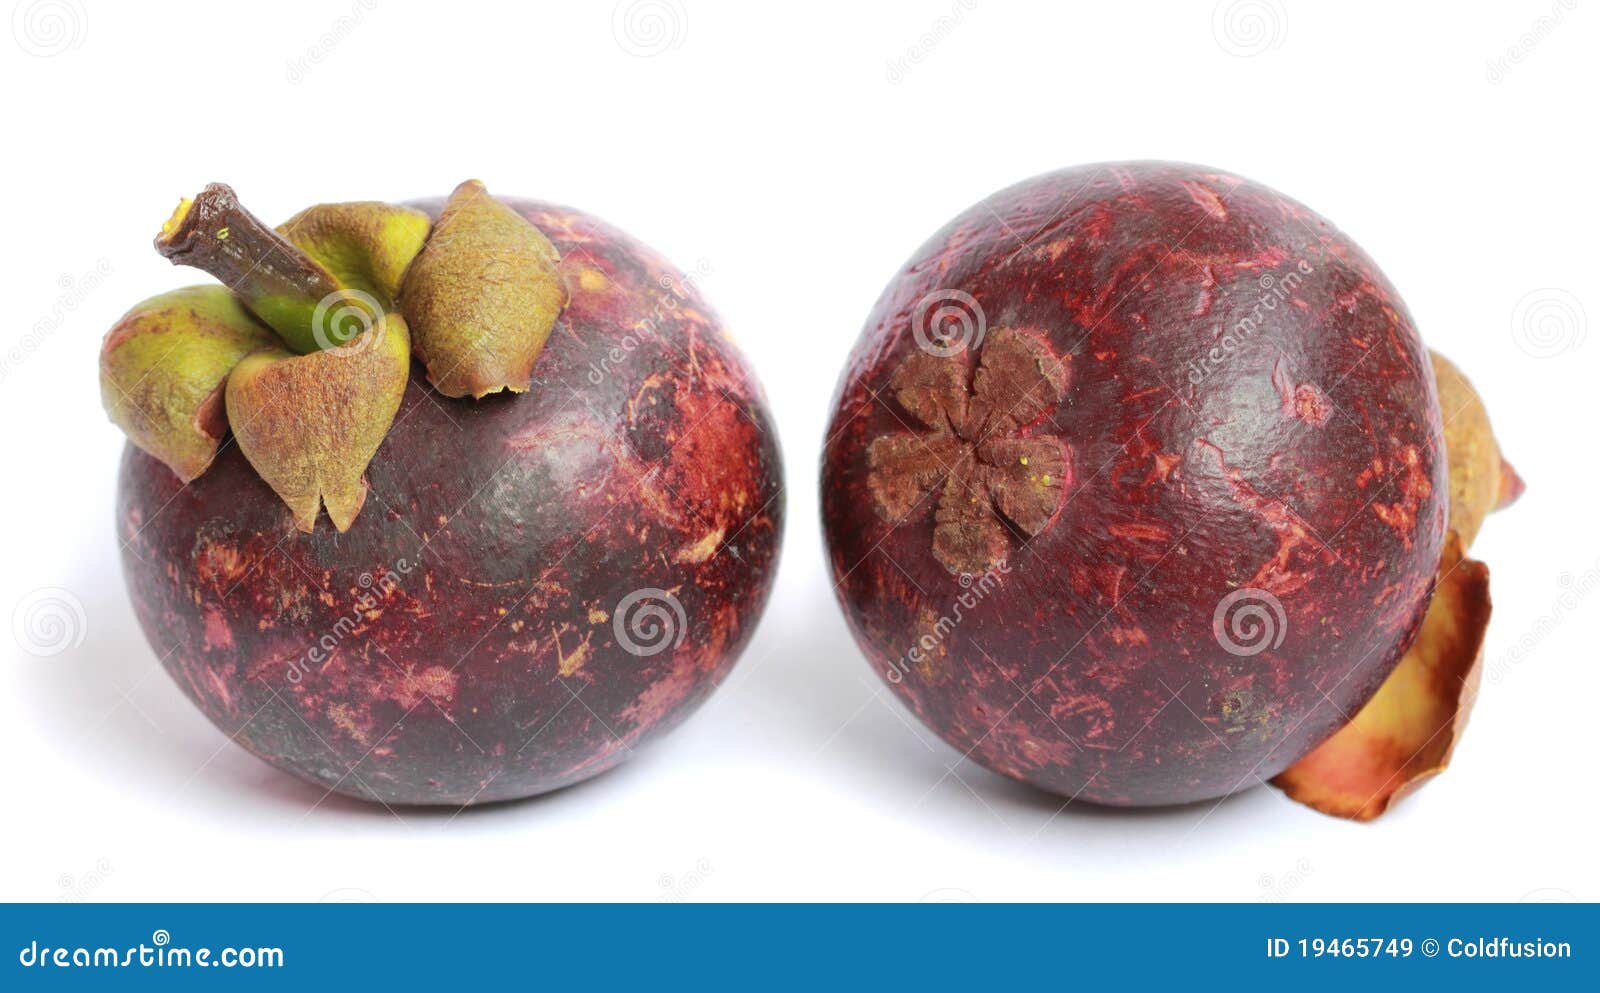 purple mangosteen - tropical fruit royalty free stock images